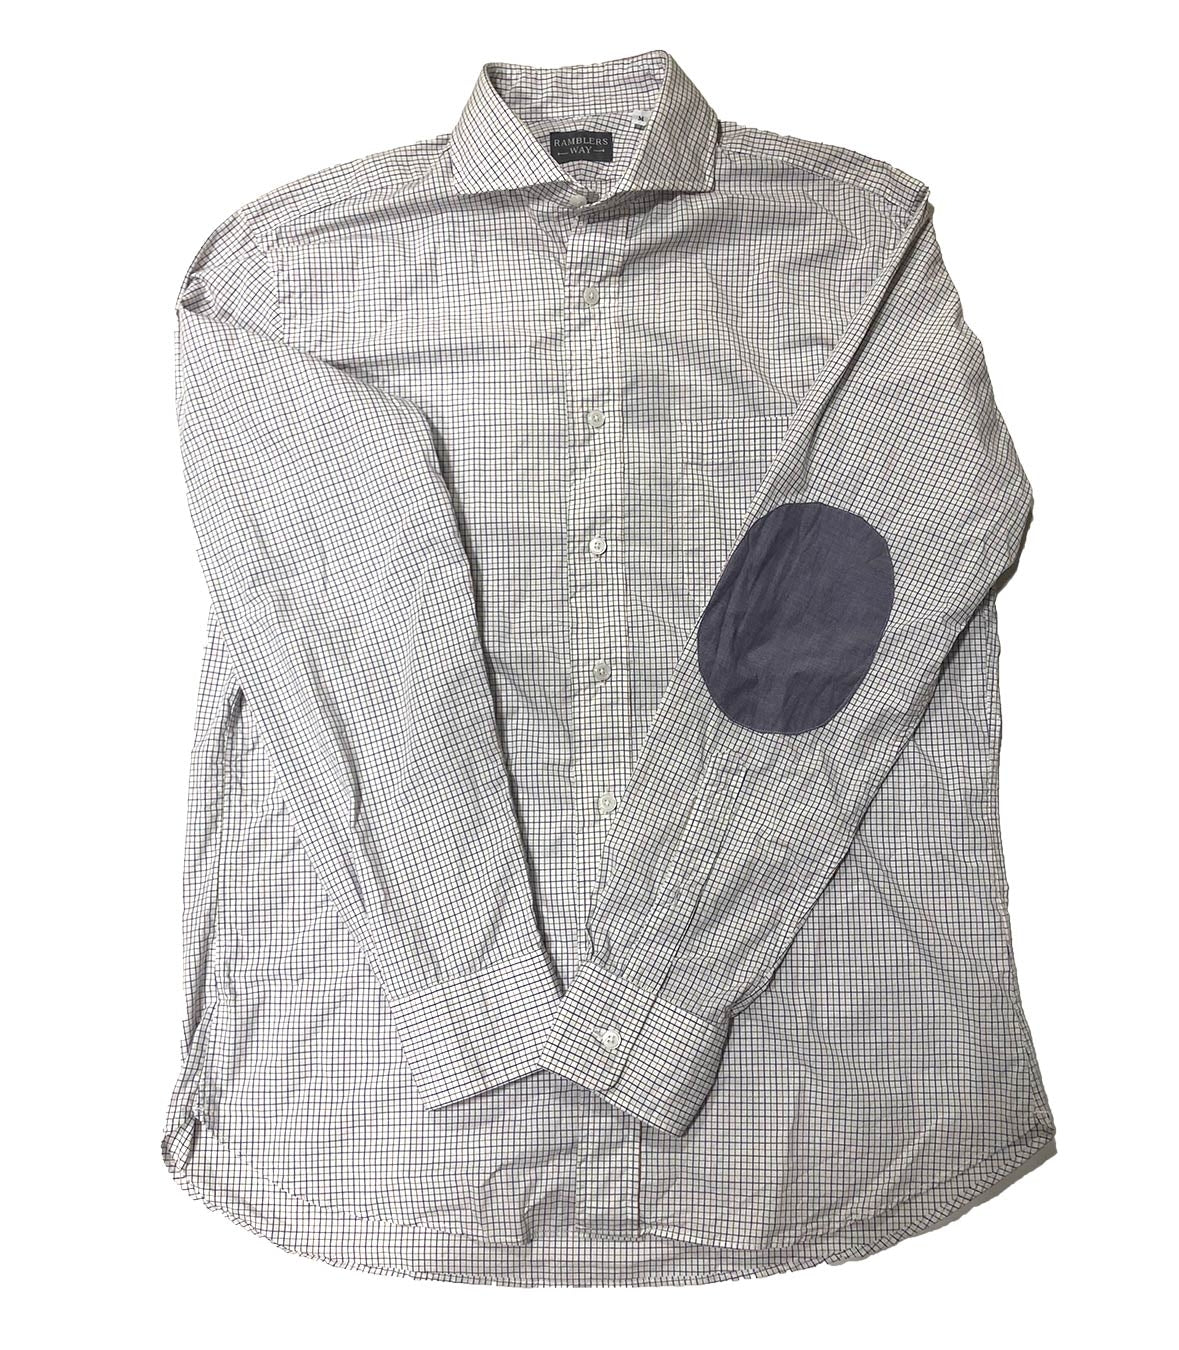 Wales Cotton Shirt w- Elbow Patches